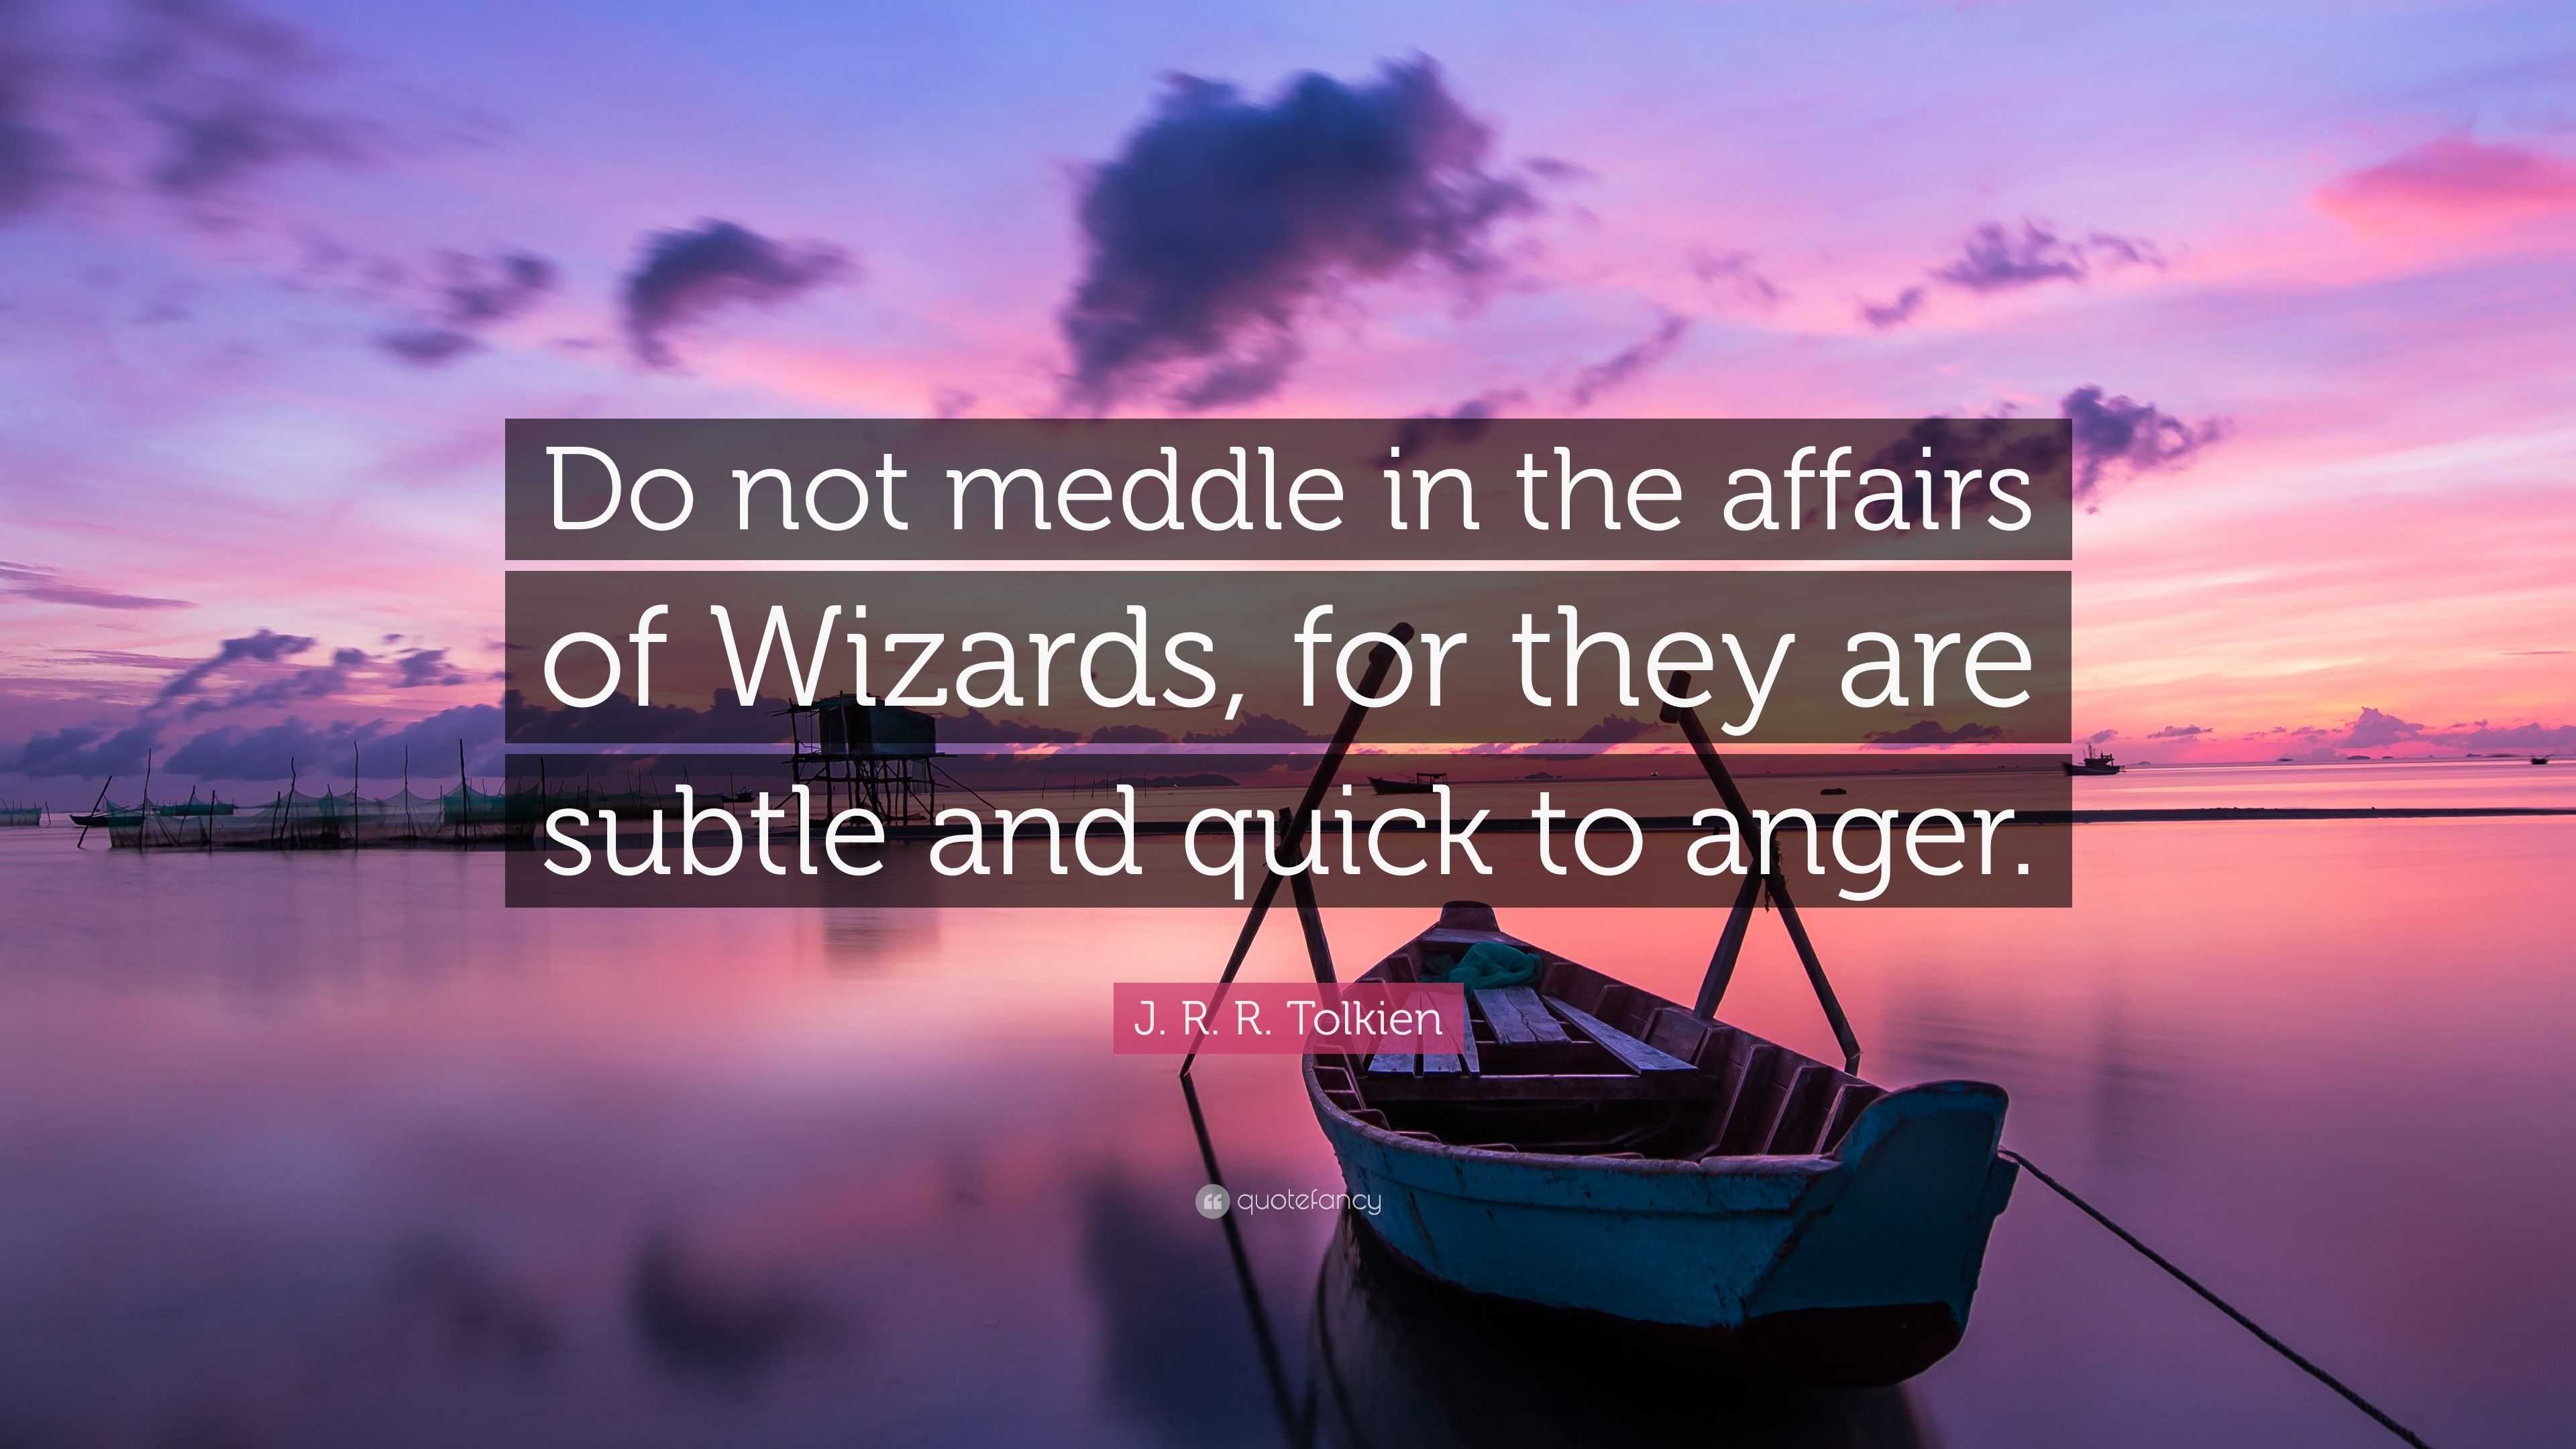 j-r-r-tolkien-quote-do-not-meddle-in-the-affairs-of-wizards-for-they-are-subtle-and-quick